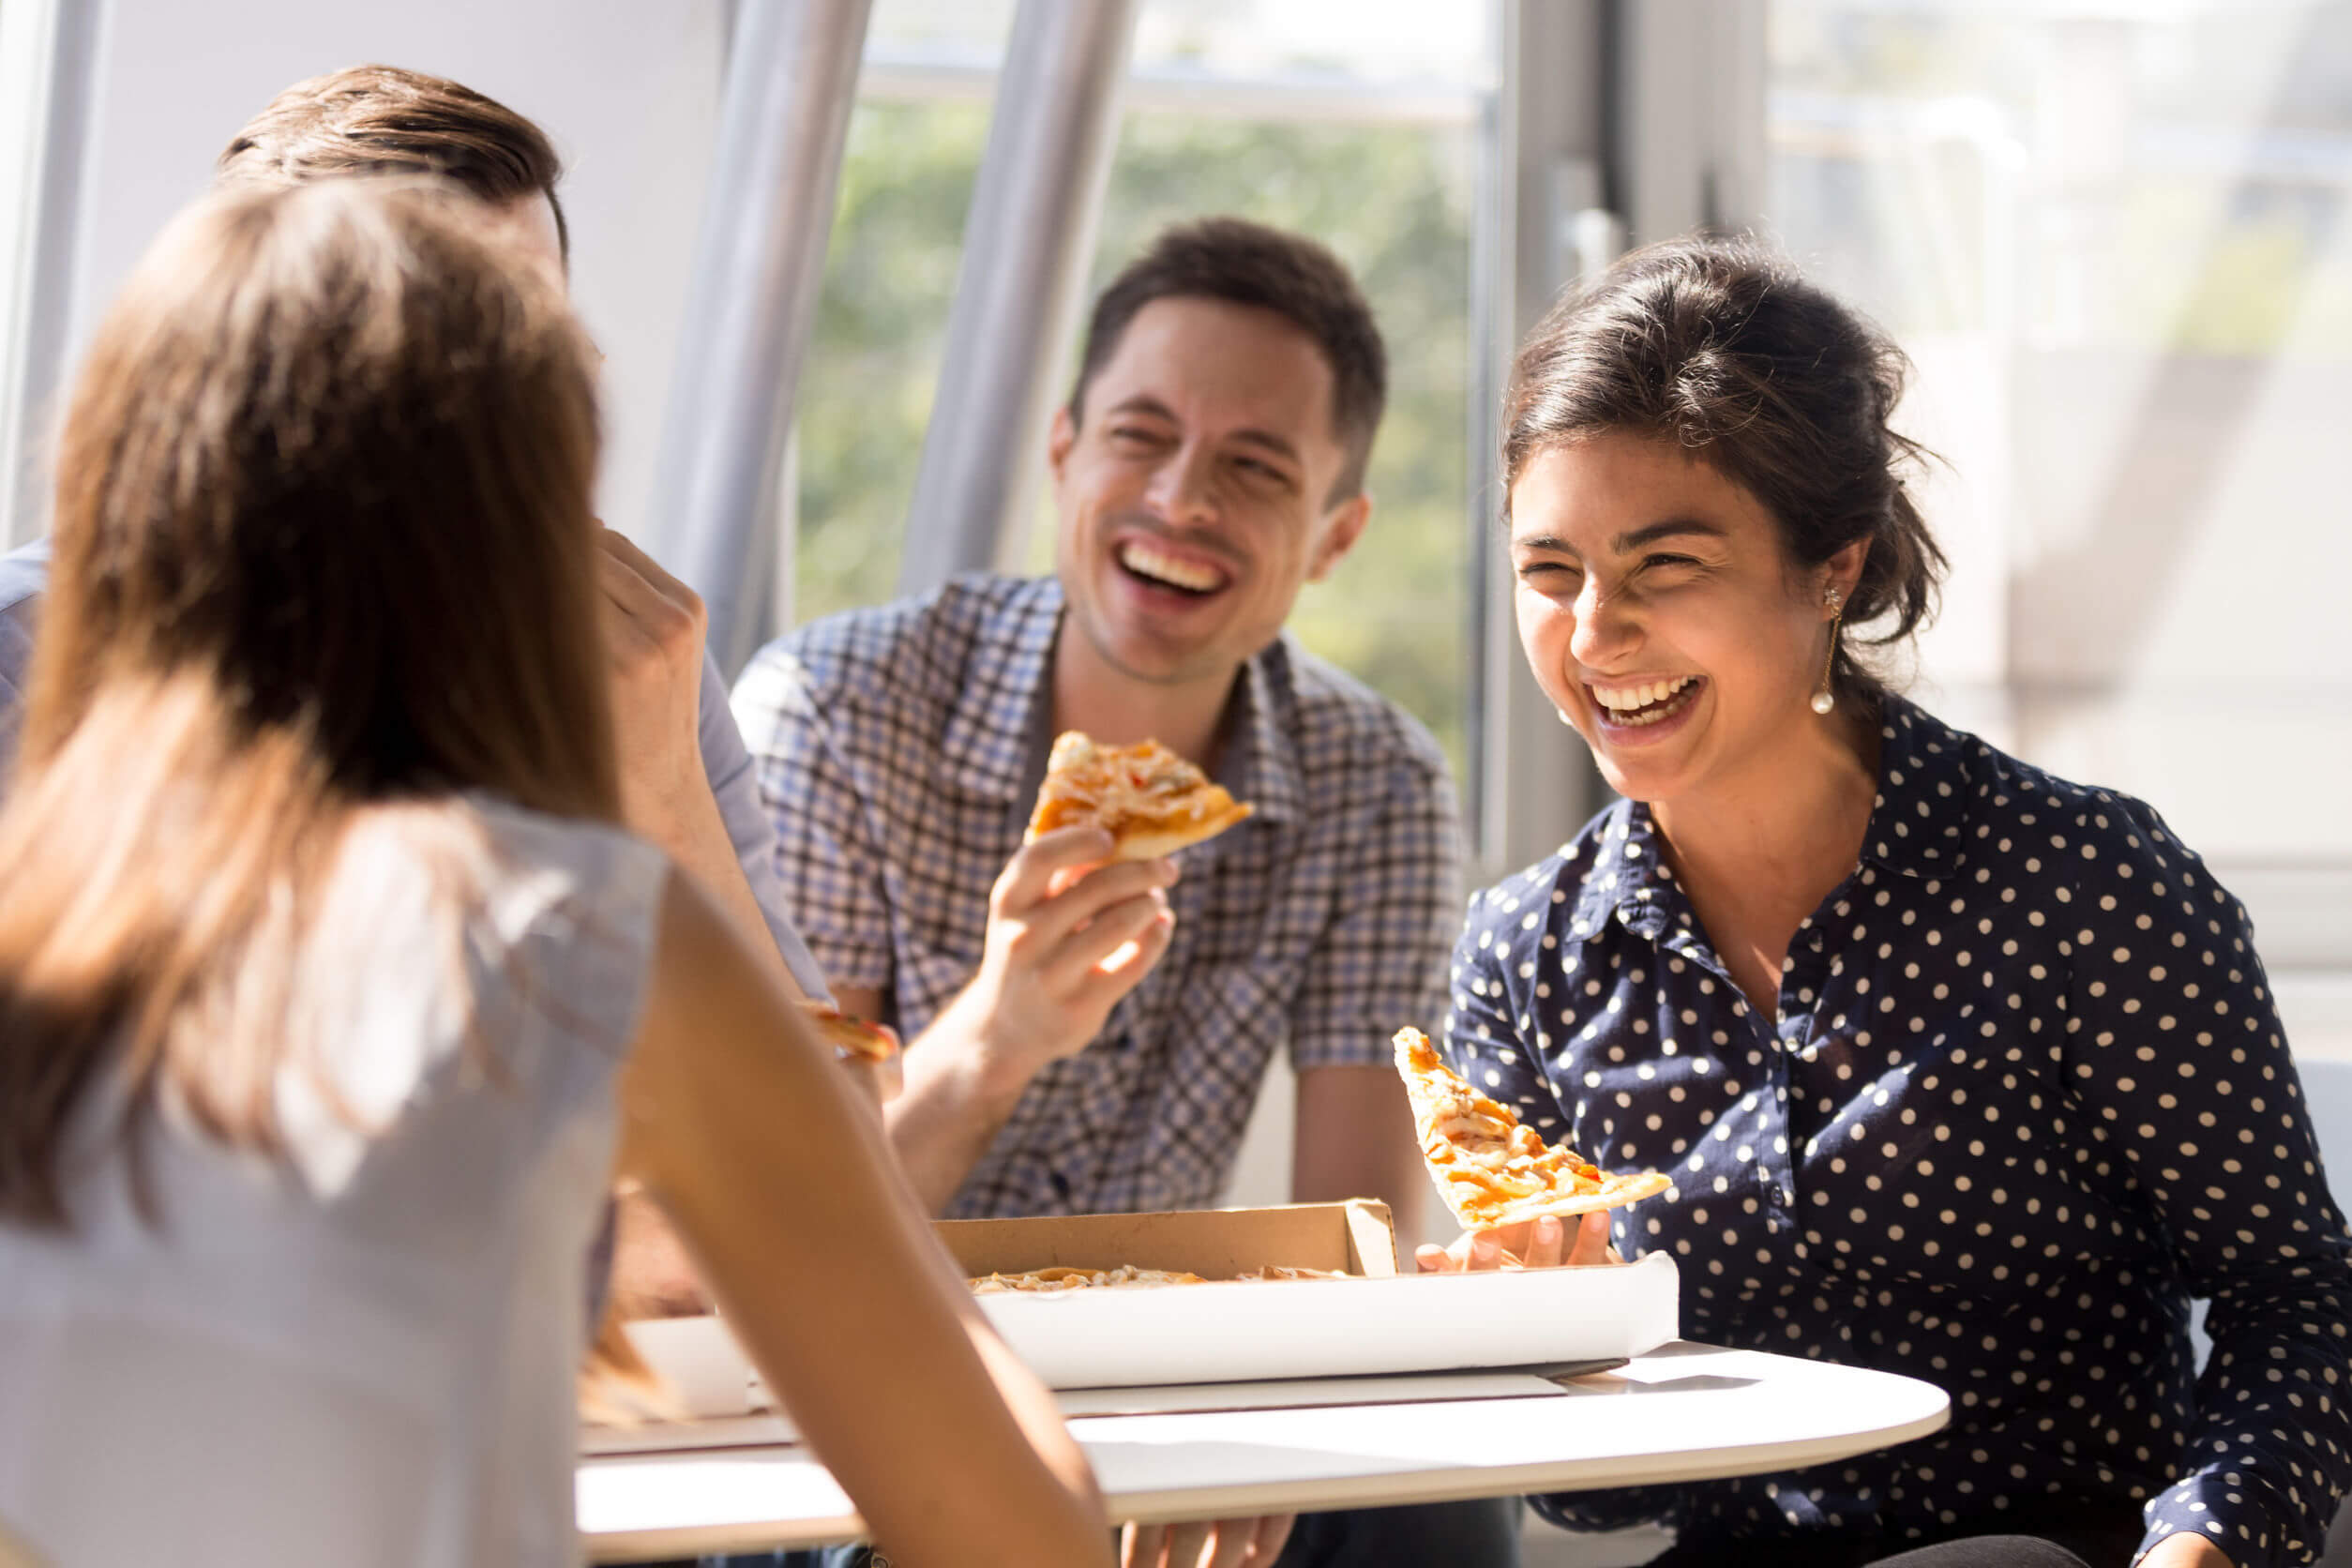 Four friends laughing as they share a pizza.